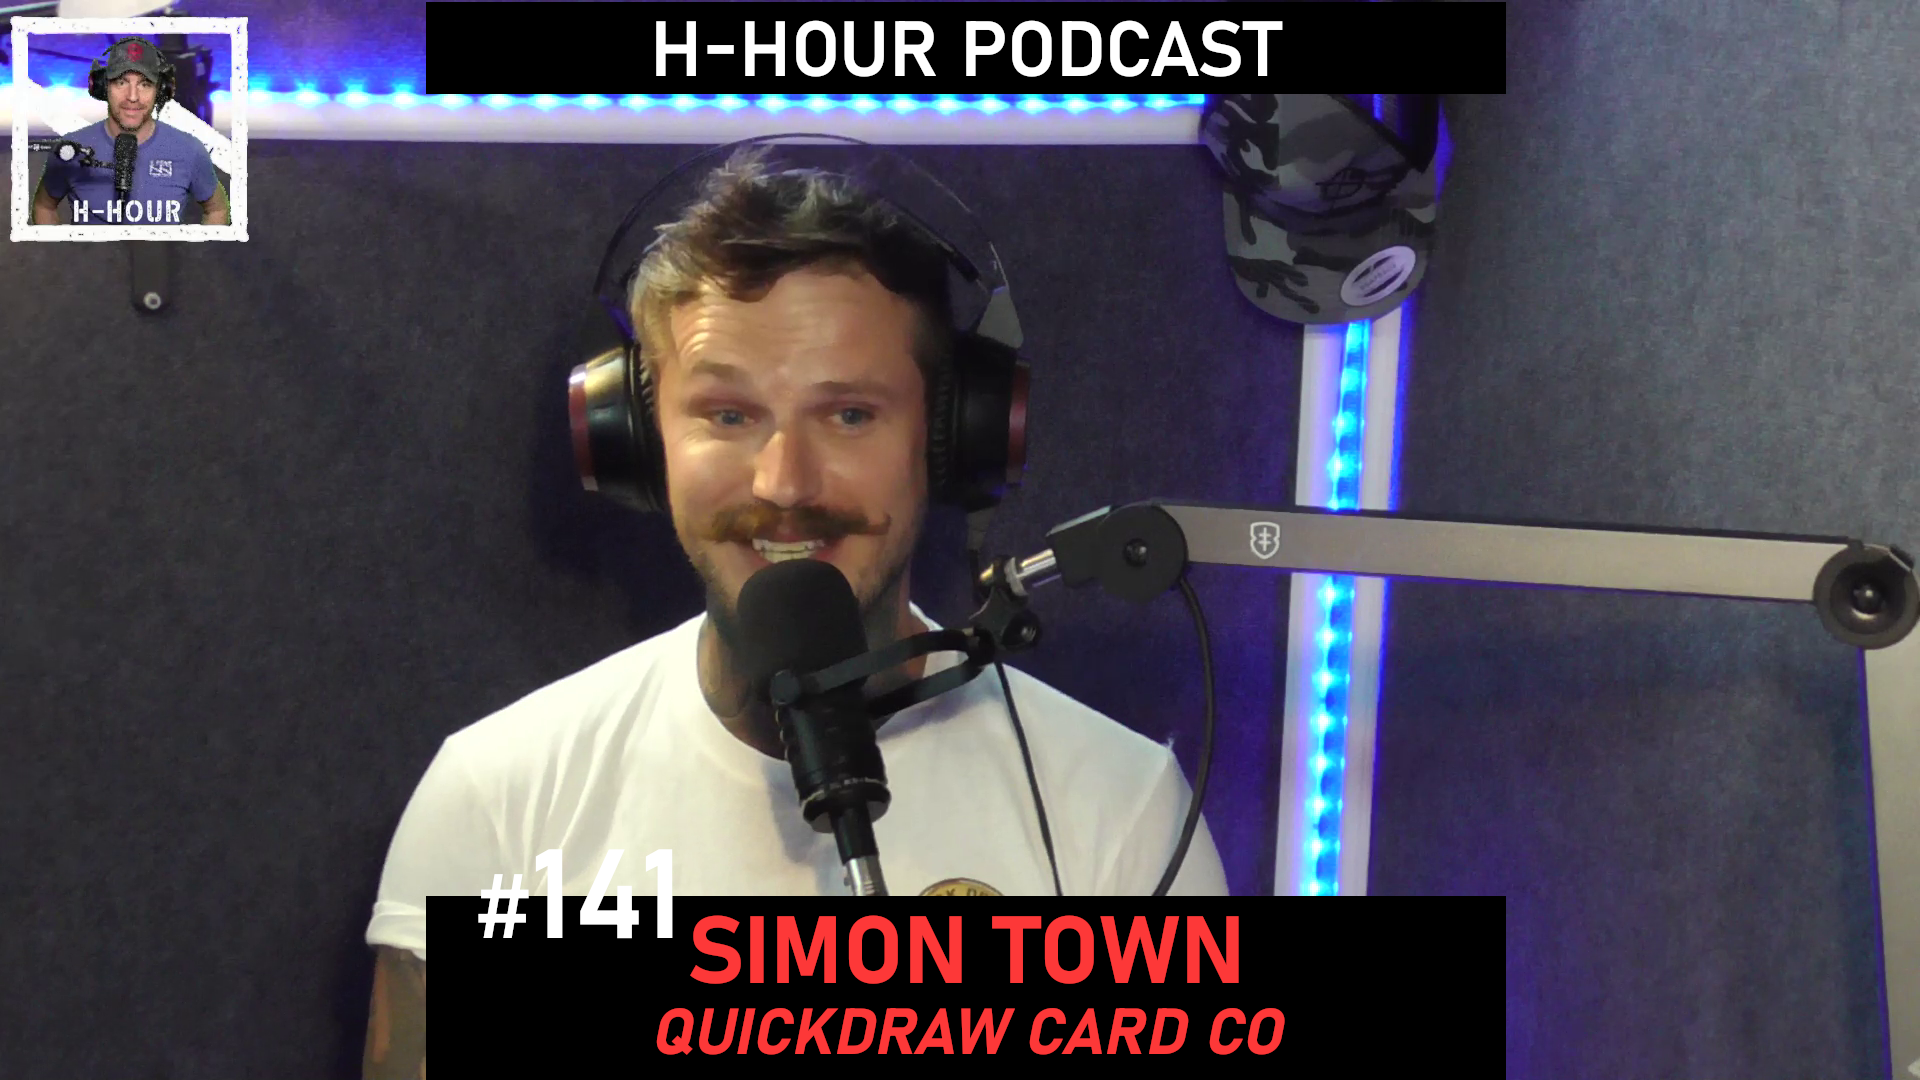 simon town quickdraw card company on the h-hour podcast